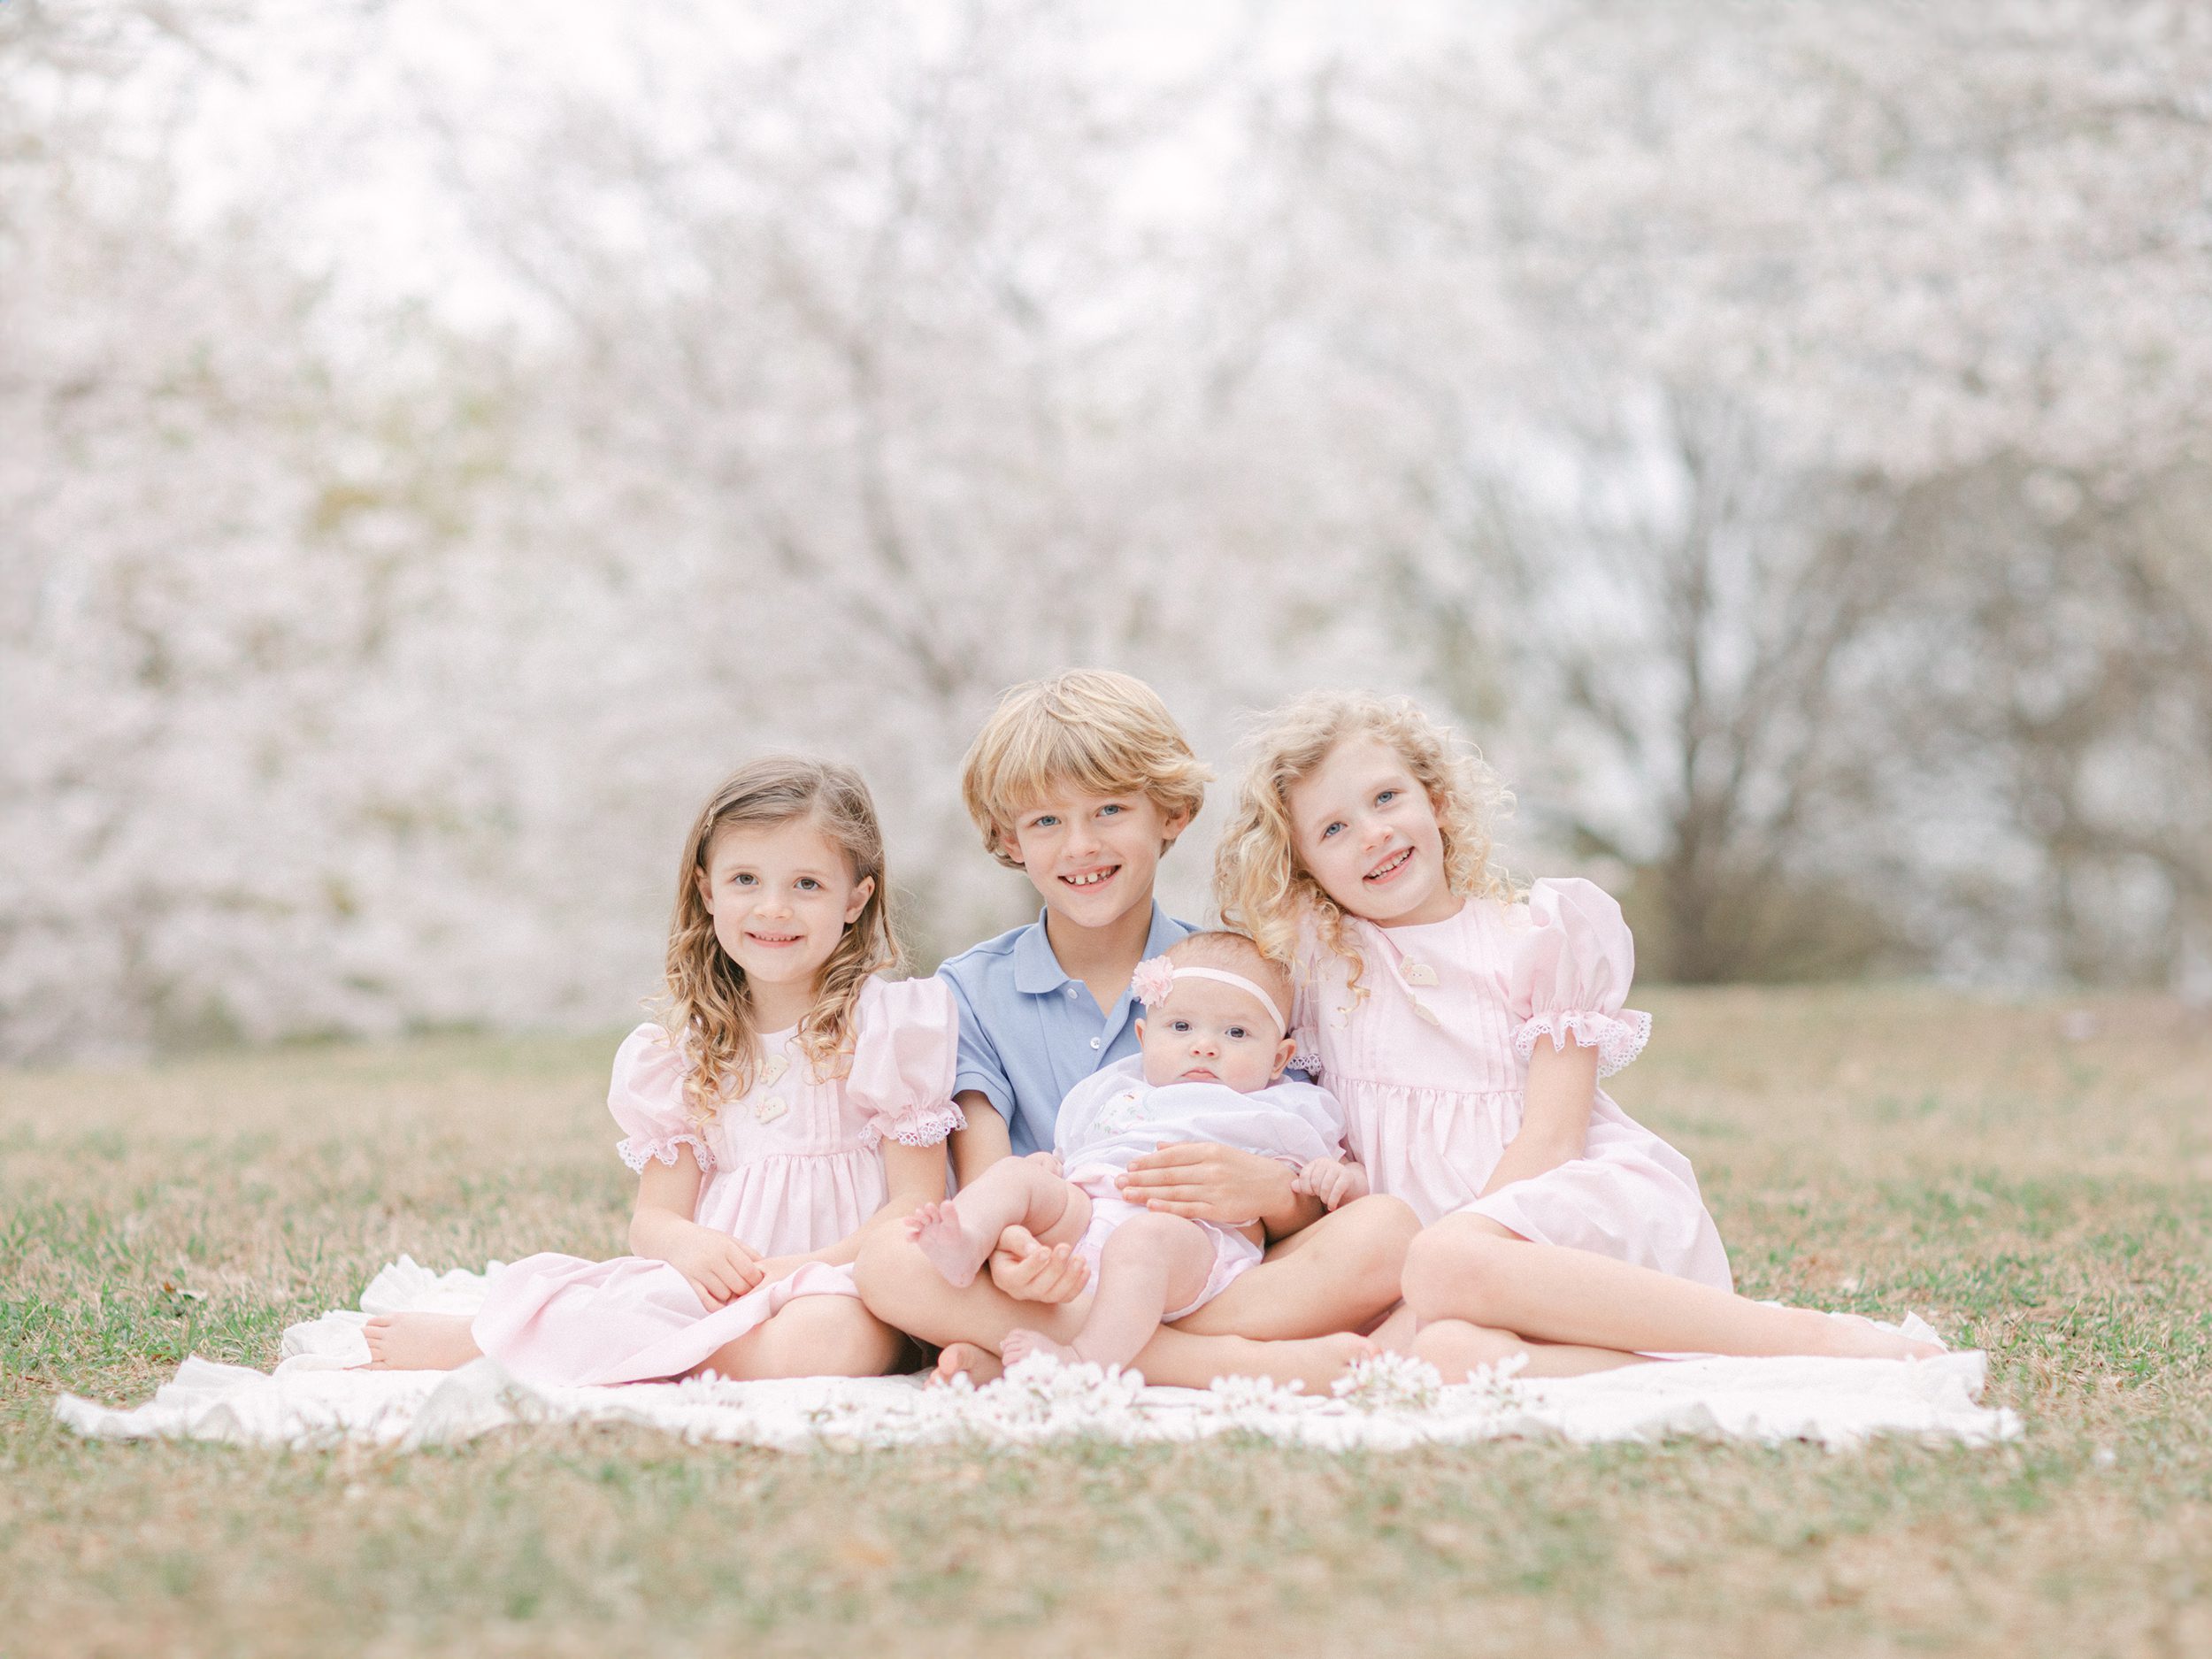 Spring sibling photoshoot among cherry trees in Athens, GA.